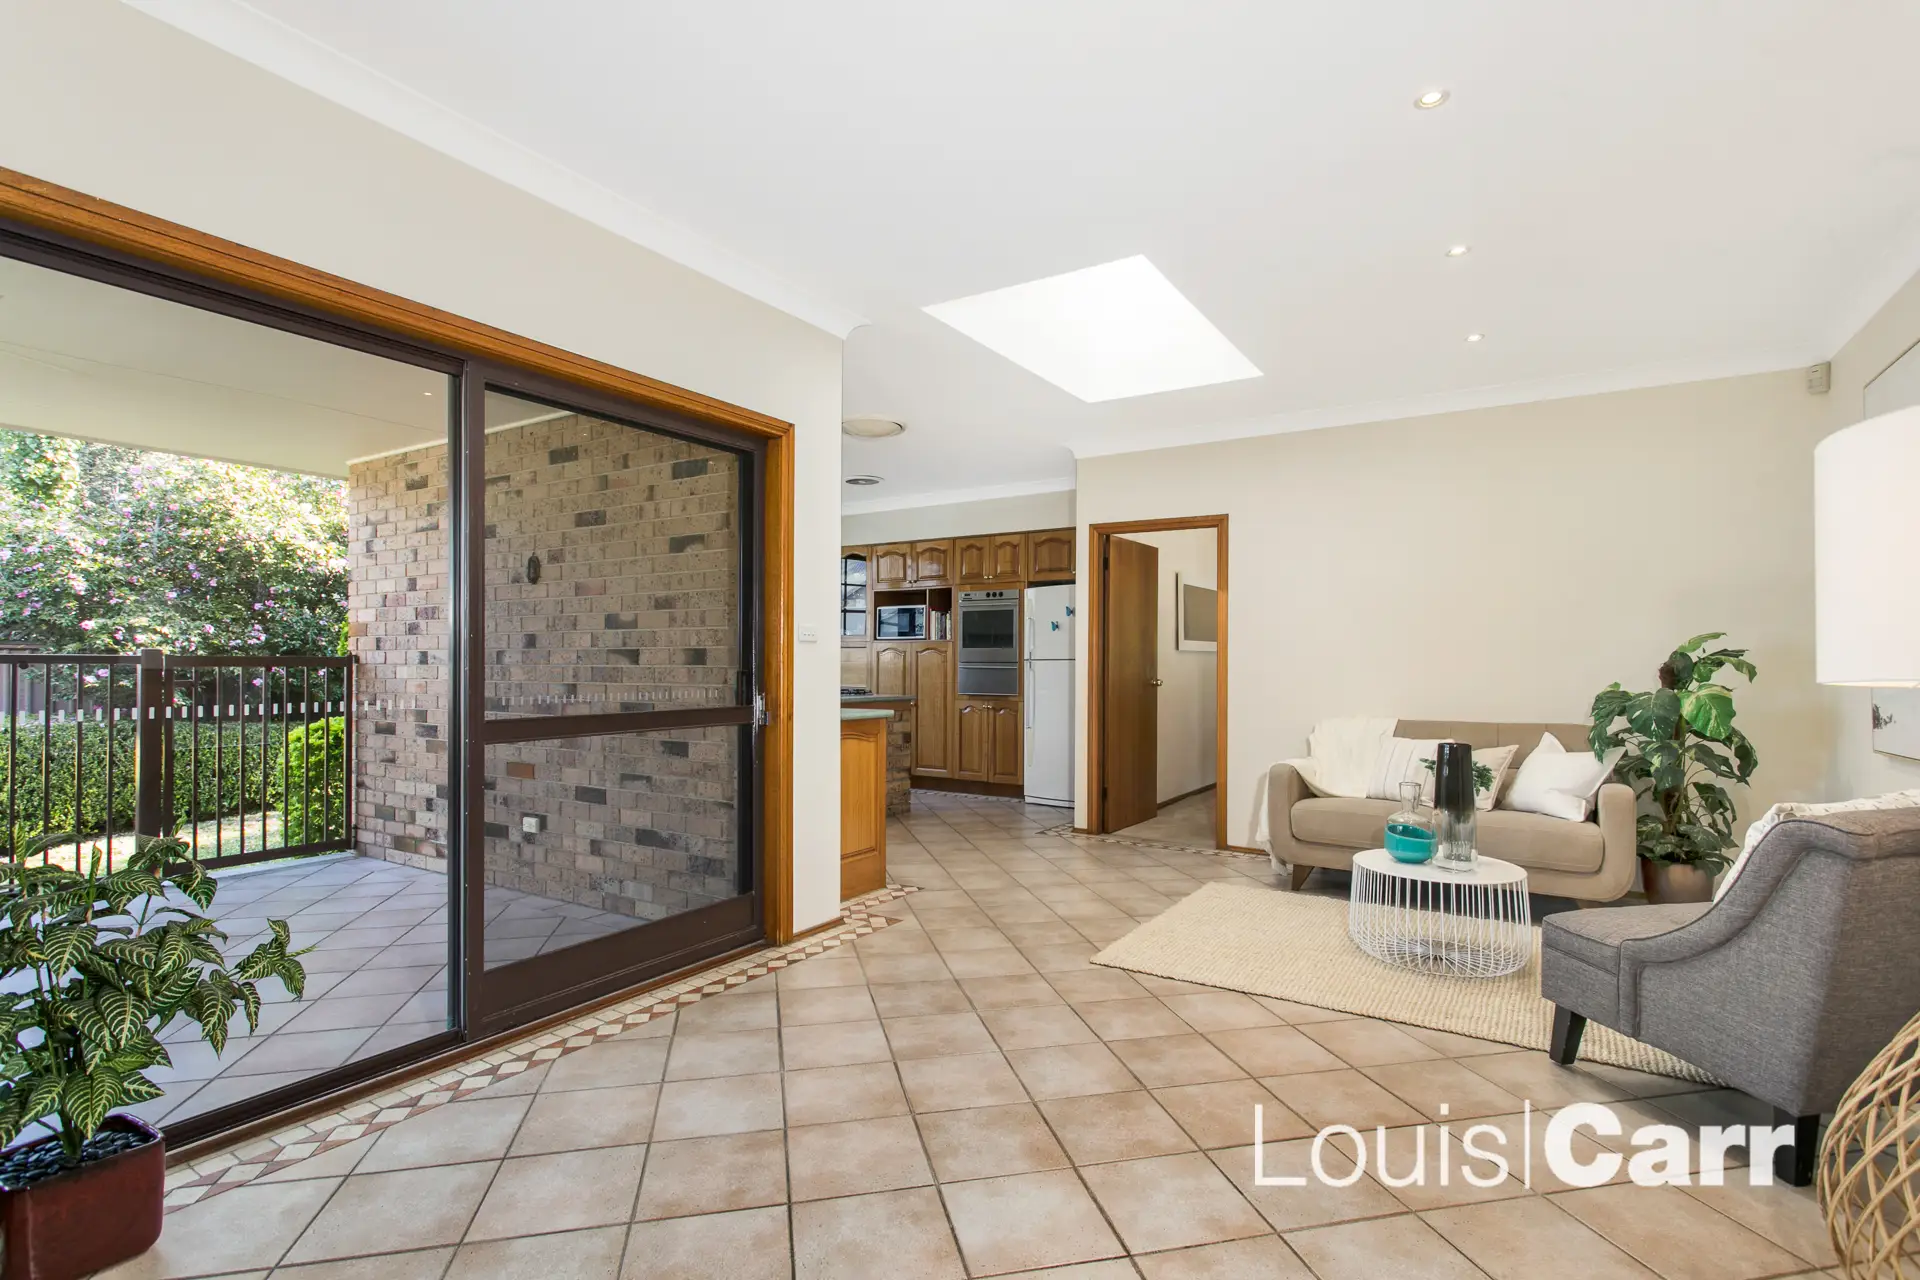 Photo #7: 33 Casuarina Drive, Cherrybrook - Sold by Louis Carr Real Estate